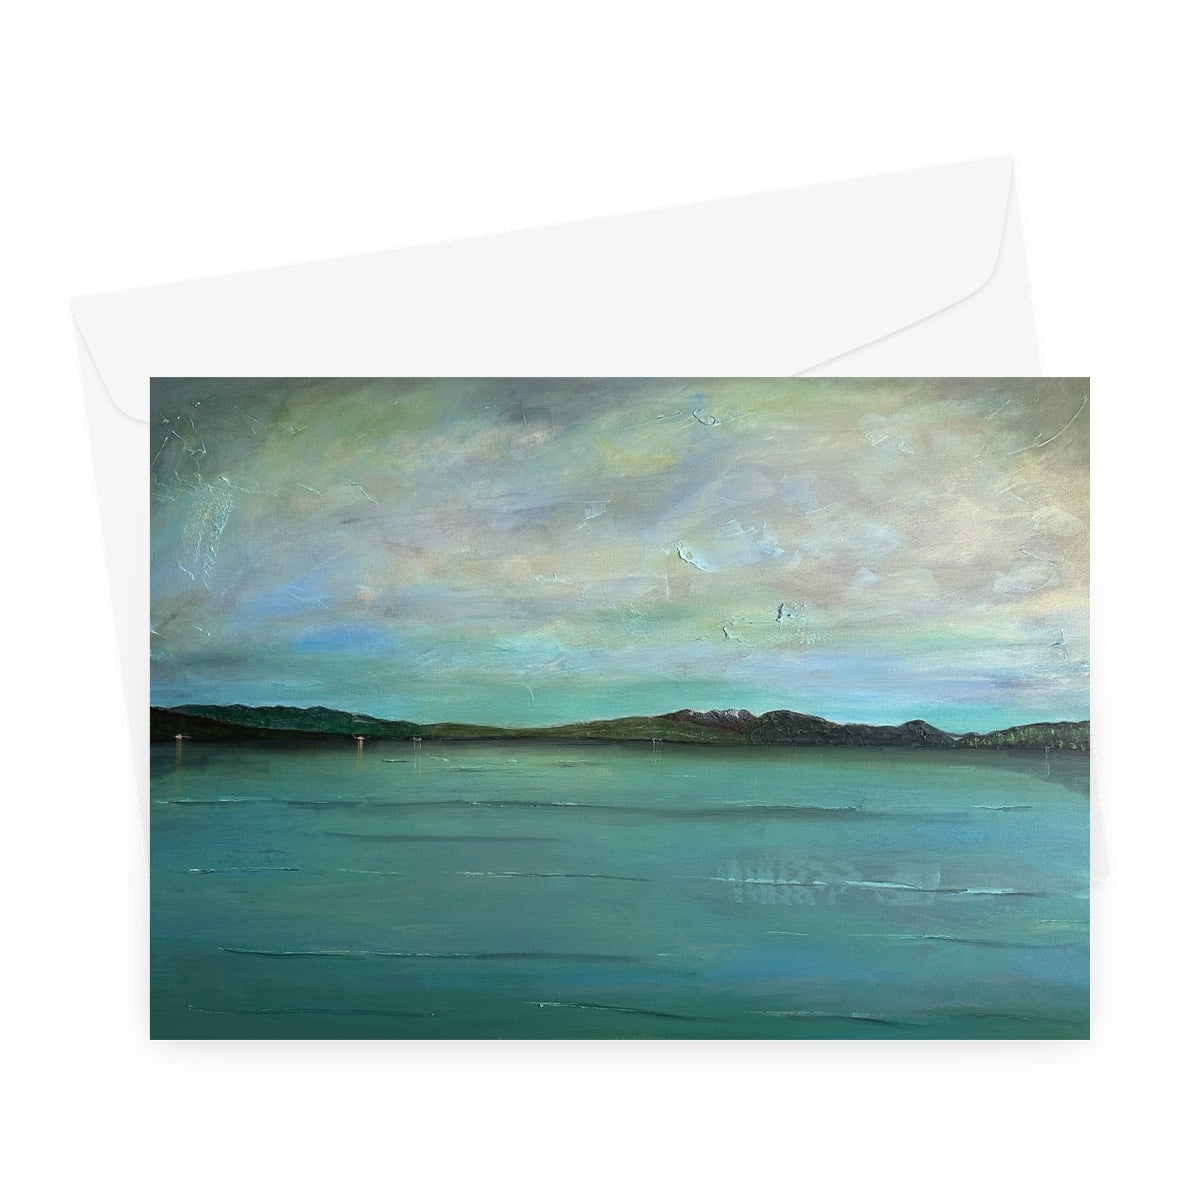 An Ethereal Loch Lomond Art Gifts Greeting Card-Greetings Cards-Scottish Lochs & Mountains Art Gallery-A5 Landscape-1 Card-Paintings, Prints, Homeware, Art Gifts From Scotland By Scottish Artist Kevin Hunter